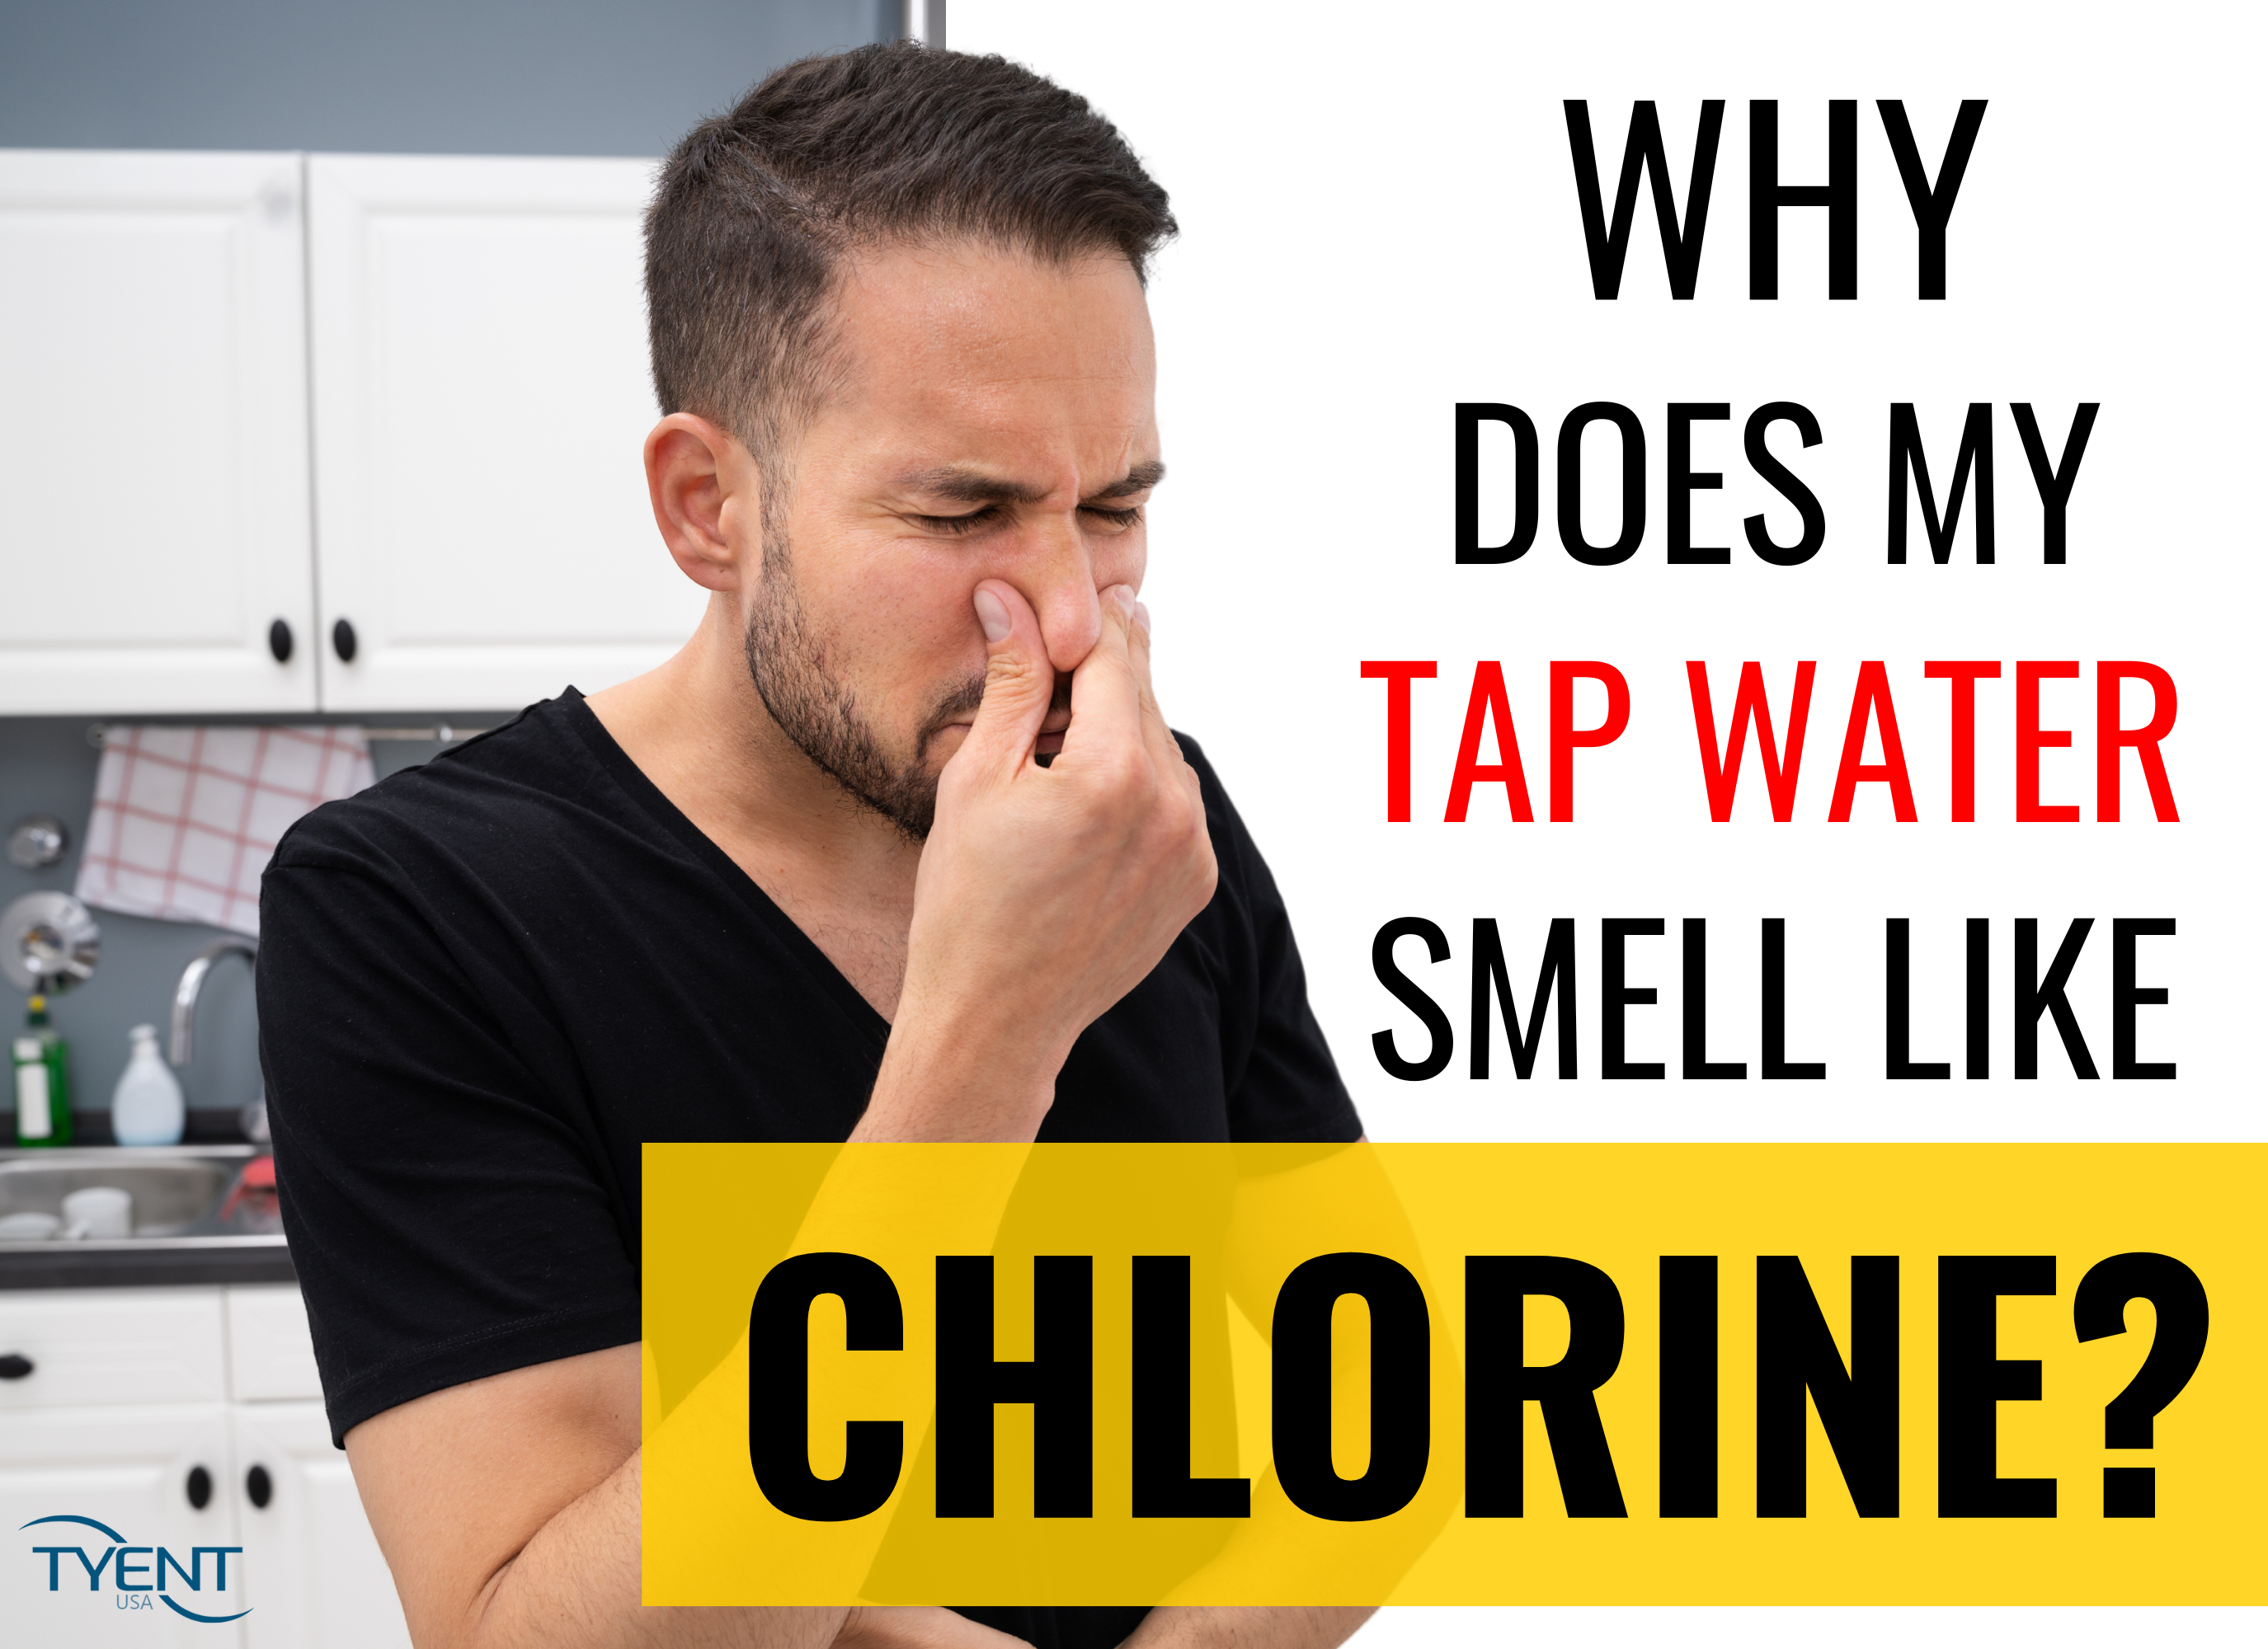 Why Does My Tap Water Smell Like Chlorine?